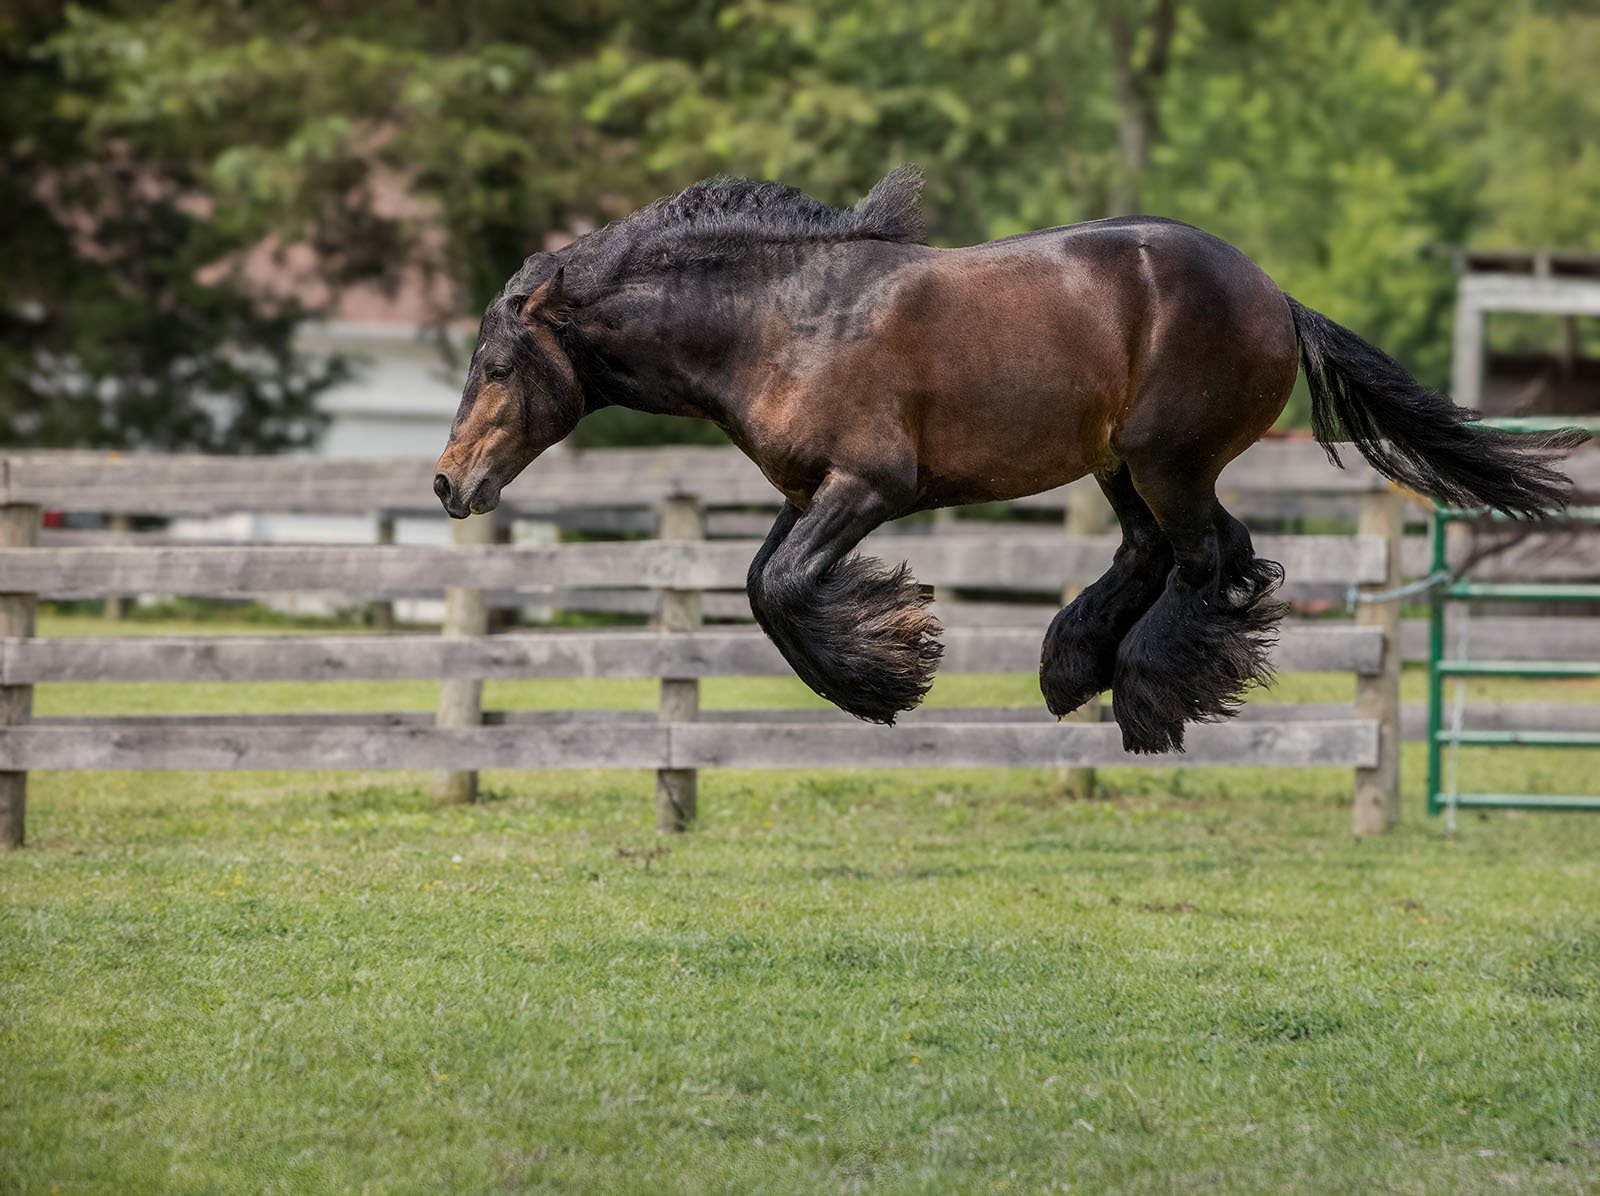 A powerful horse with a dark brown coat and thick feathered legs is captured mid-air in an energetic leap inside a fenced field. Green grass covers the ground and trees are visible in the background, creating a serene, pastoral scene.